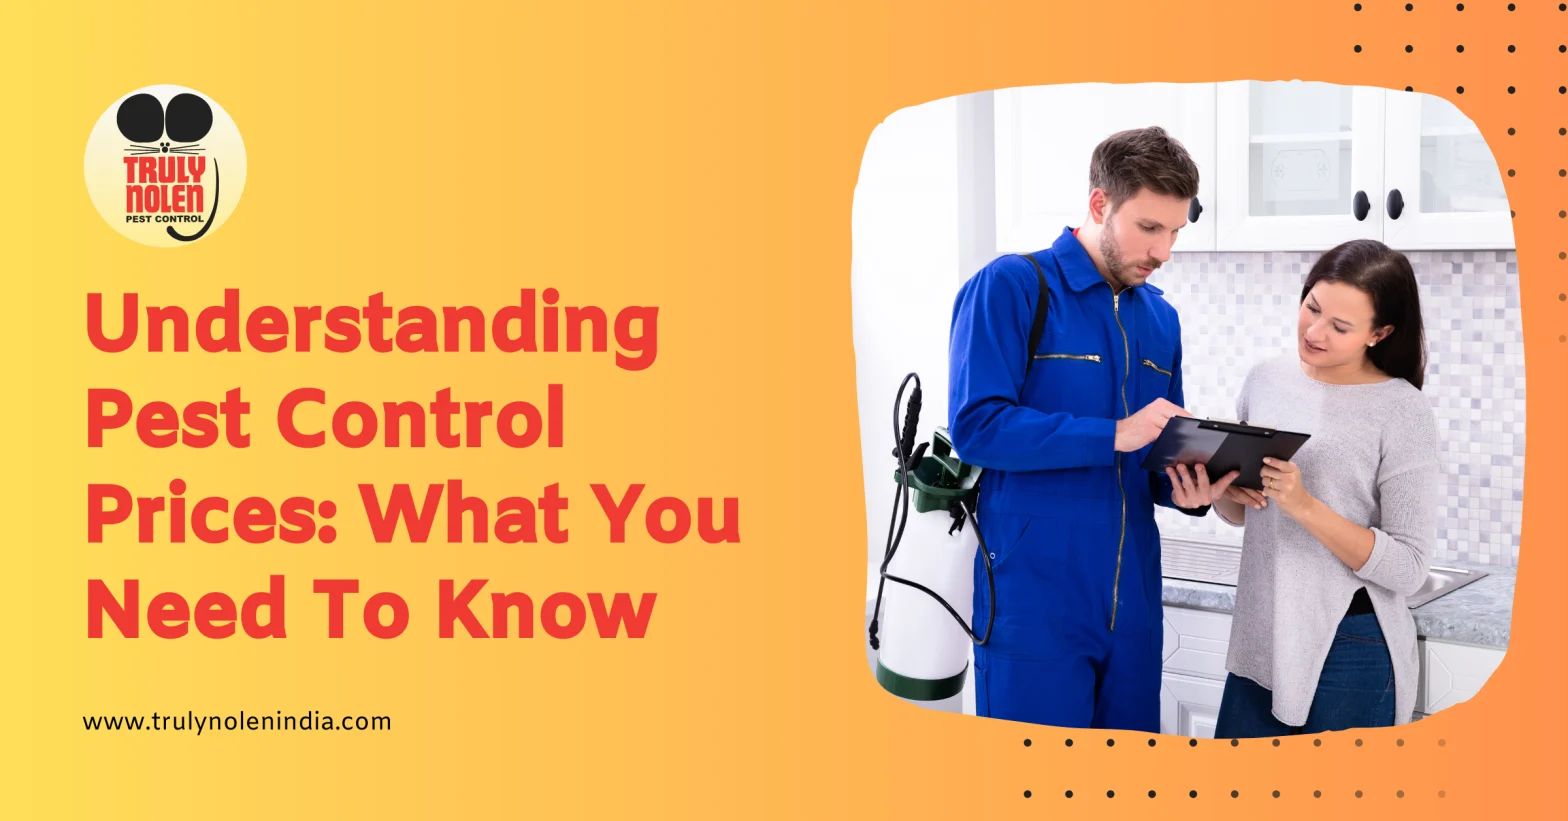 Understanding Pest Control Prices: What You Need To Know